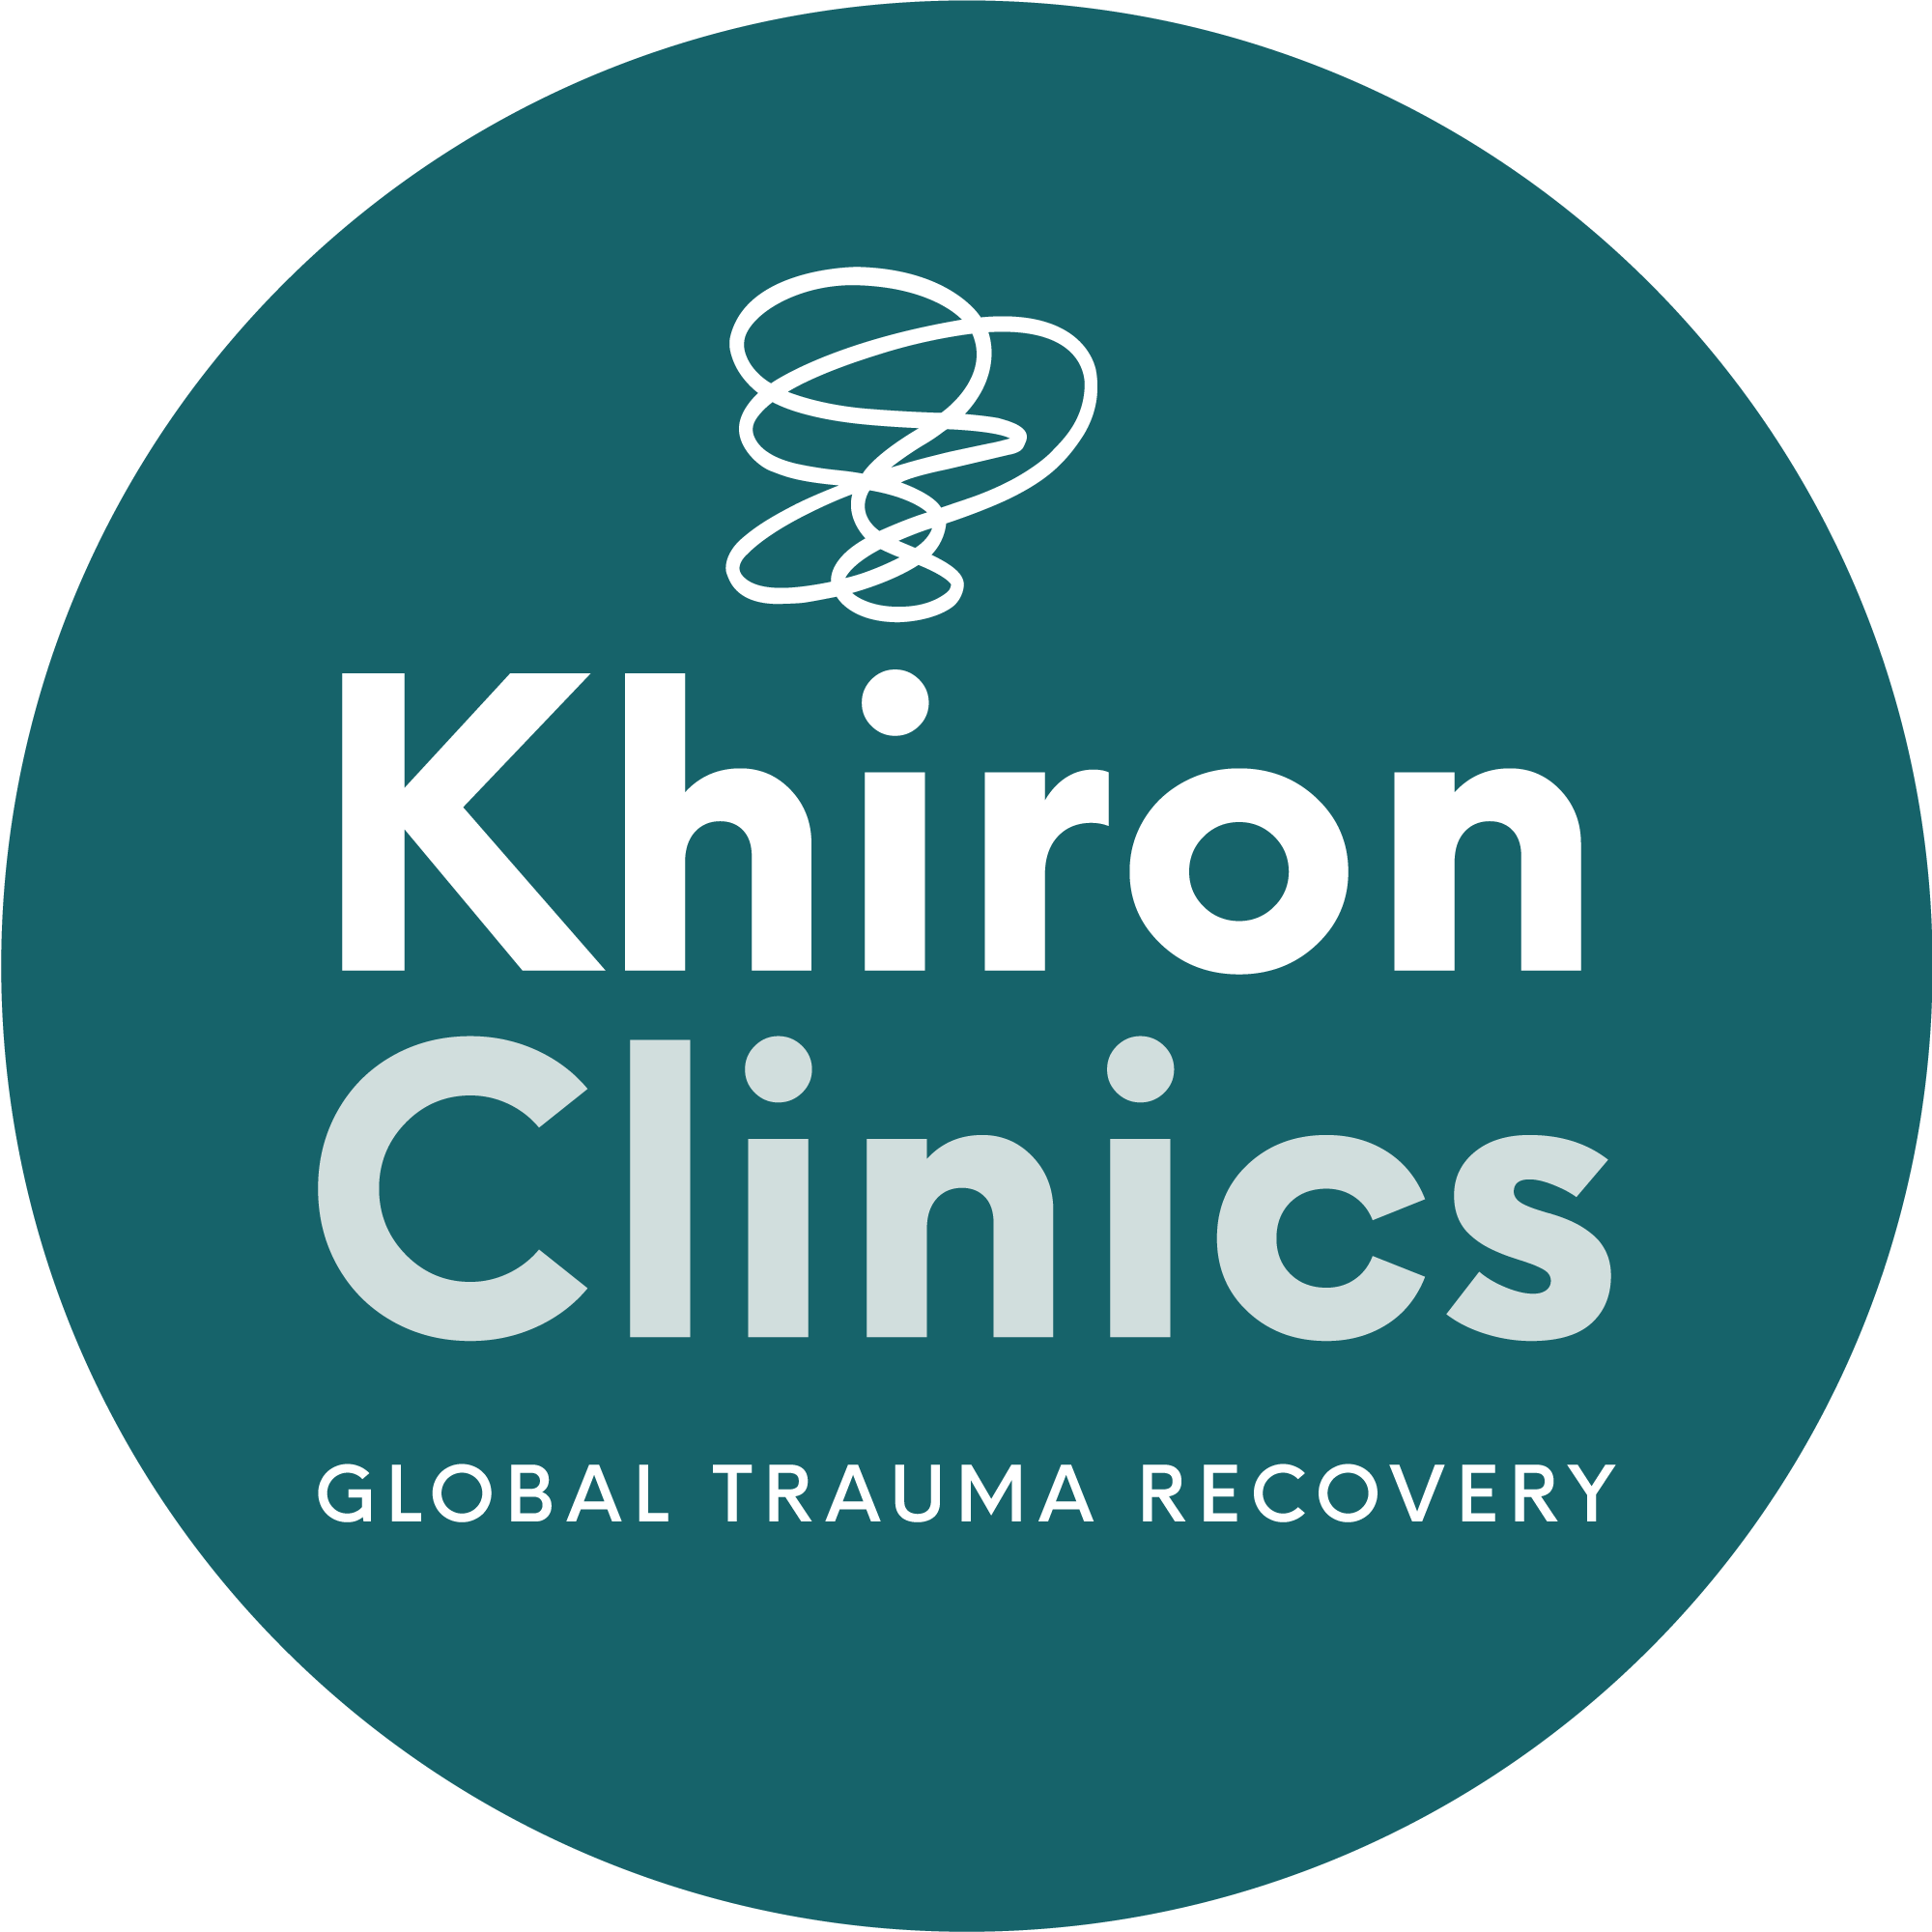 A circular logo with a teal background features "Khiron Clinics" in bold, white letters and "GLOBAL TRAUMA RECOVERY" in smaller white text below. Above the text is an abstract, white, spiral design, emphasizing its role as a leading trauma clinic.